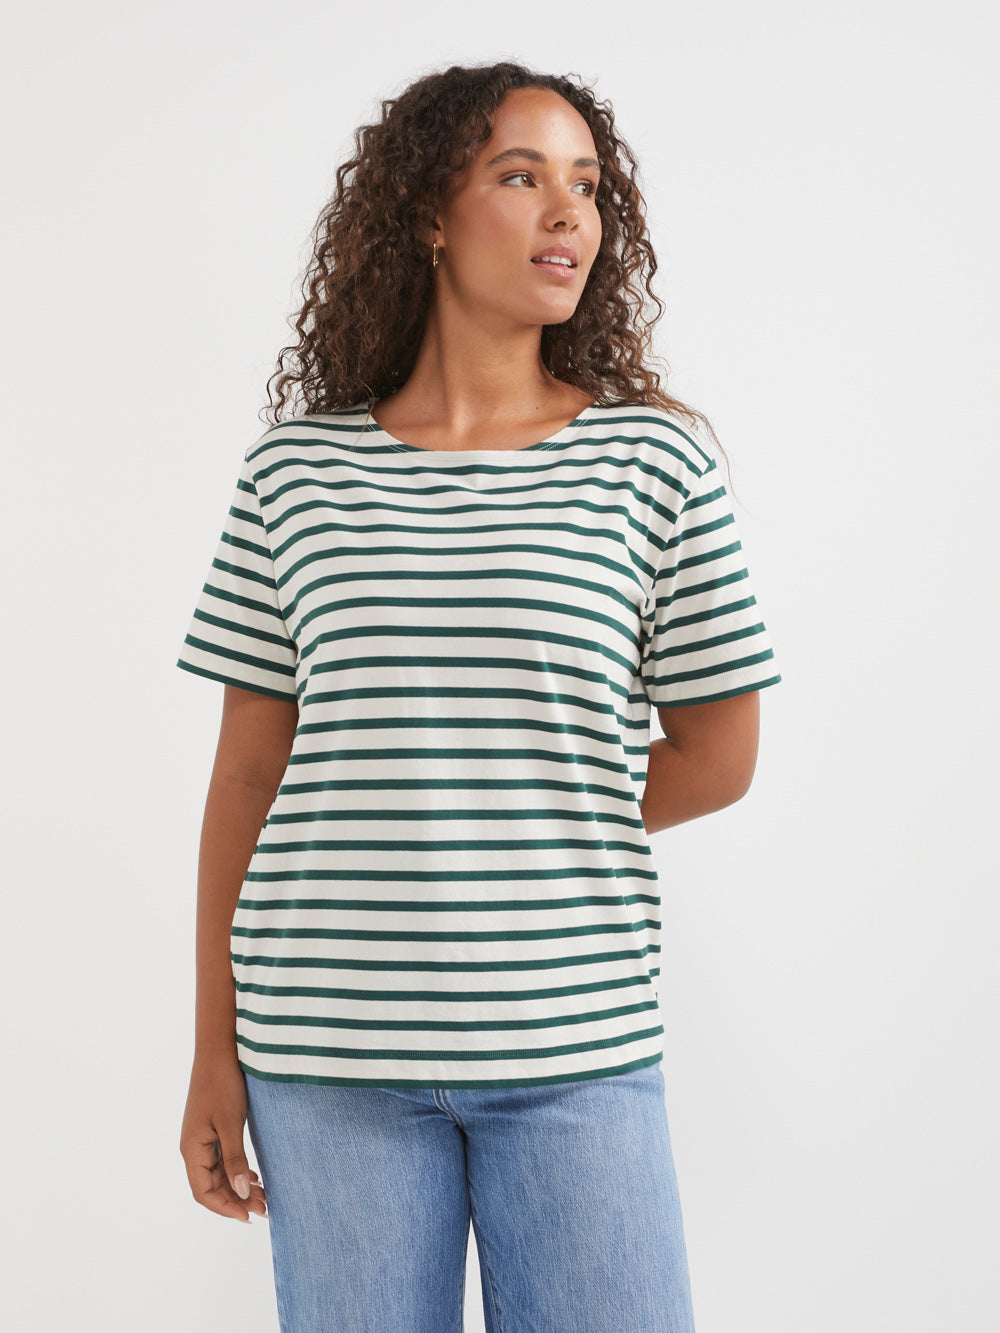 The Relaxed Stripe Tee